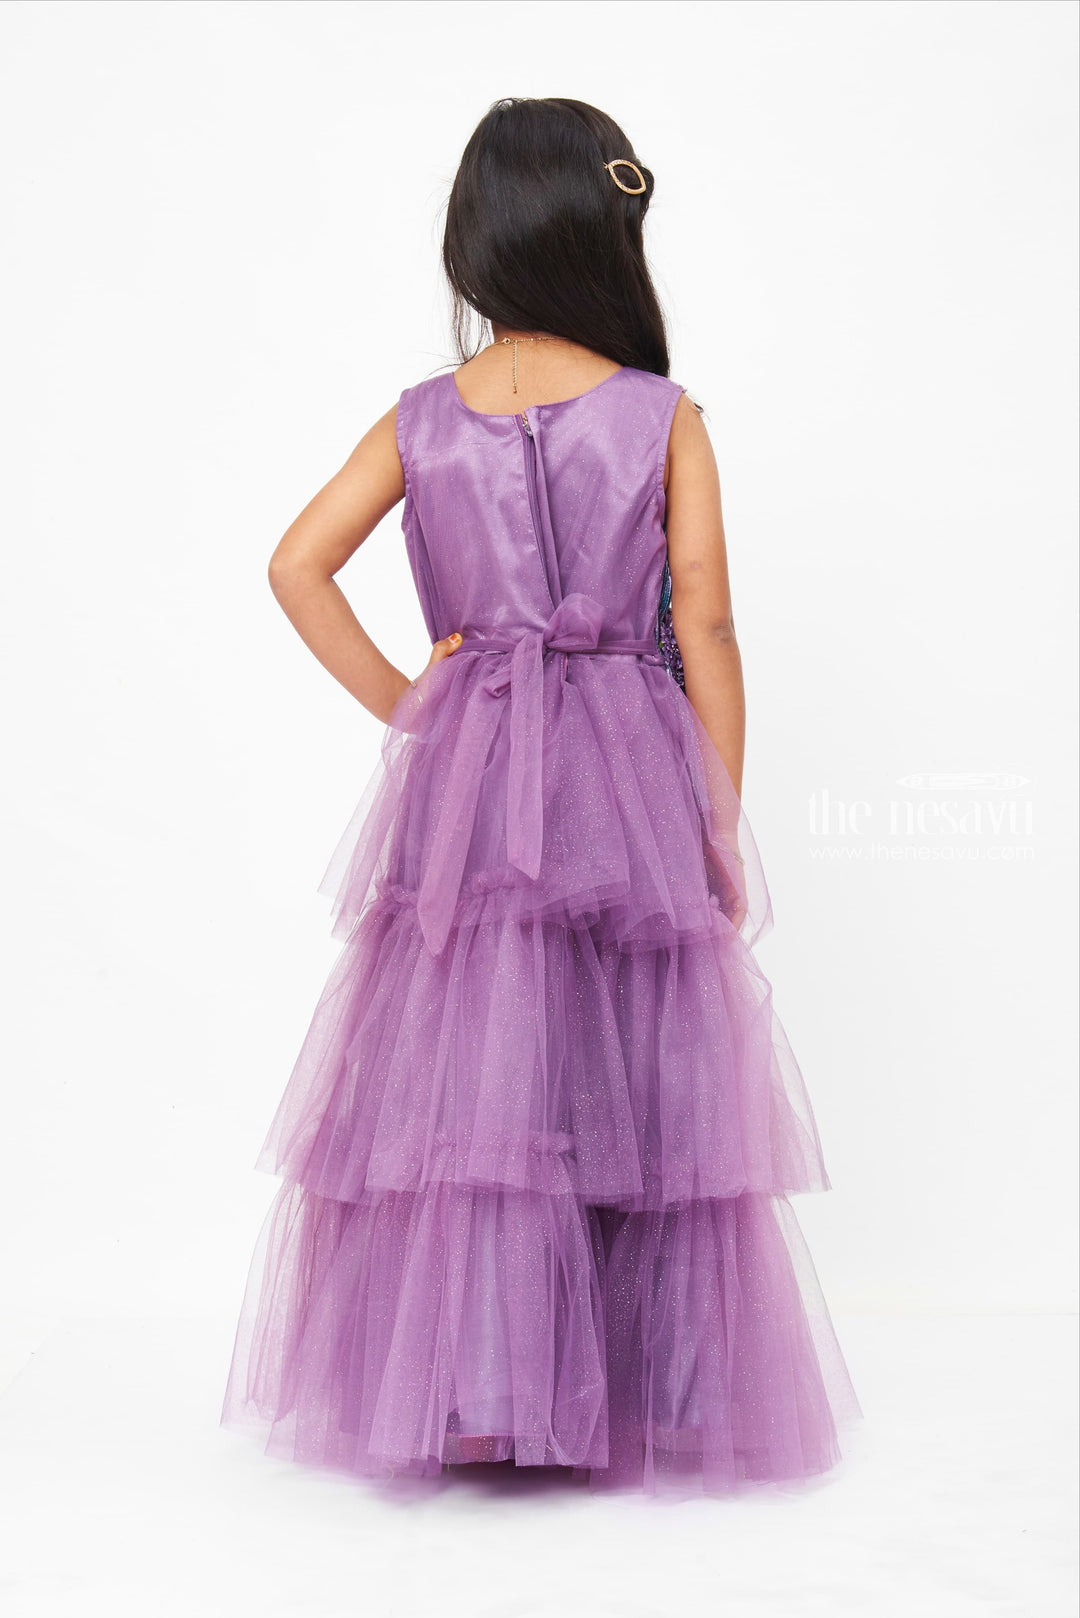 The Nesavu Girls Party Gown Luxurious Twilight Purple Party Gown with Embellished Pleated Fan Detail Nesavu Twilight Purple Party Gown | Embellished Pleated Evening Dress Online | The Nesavu